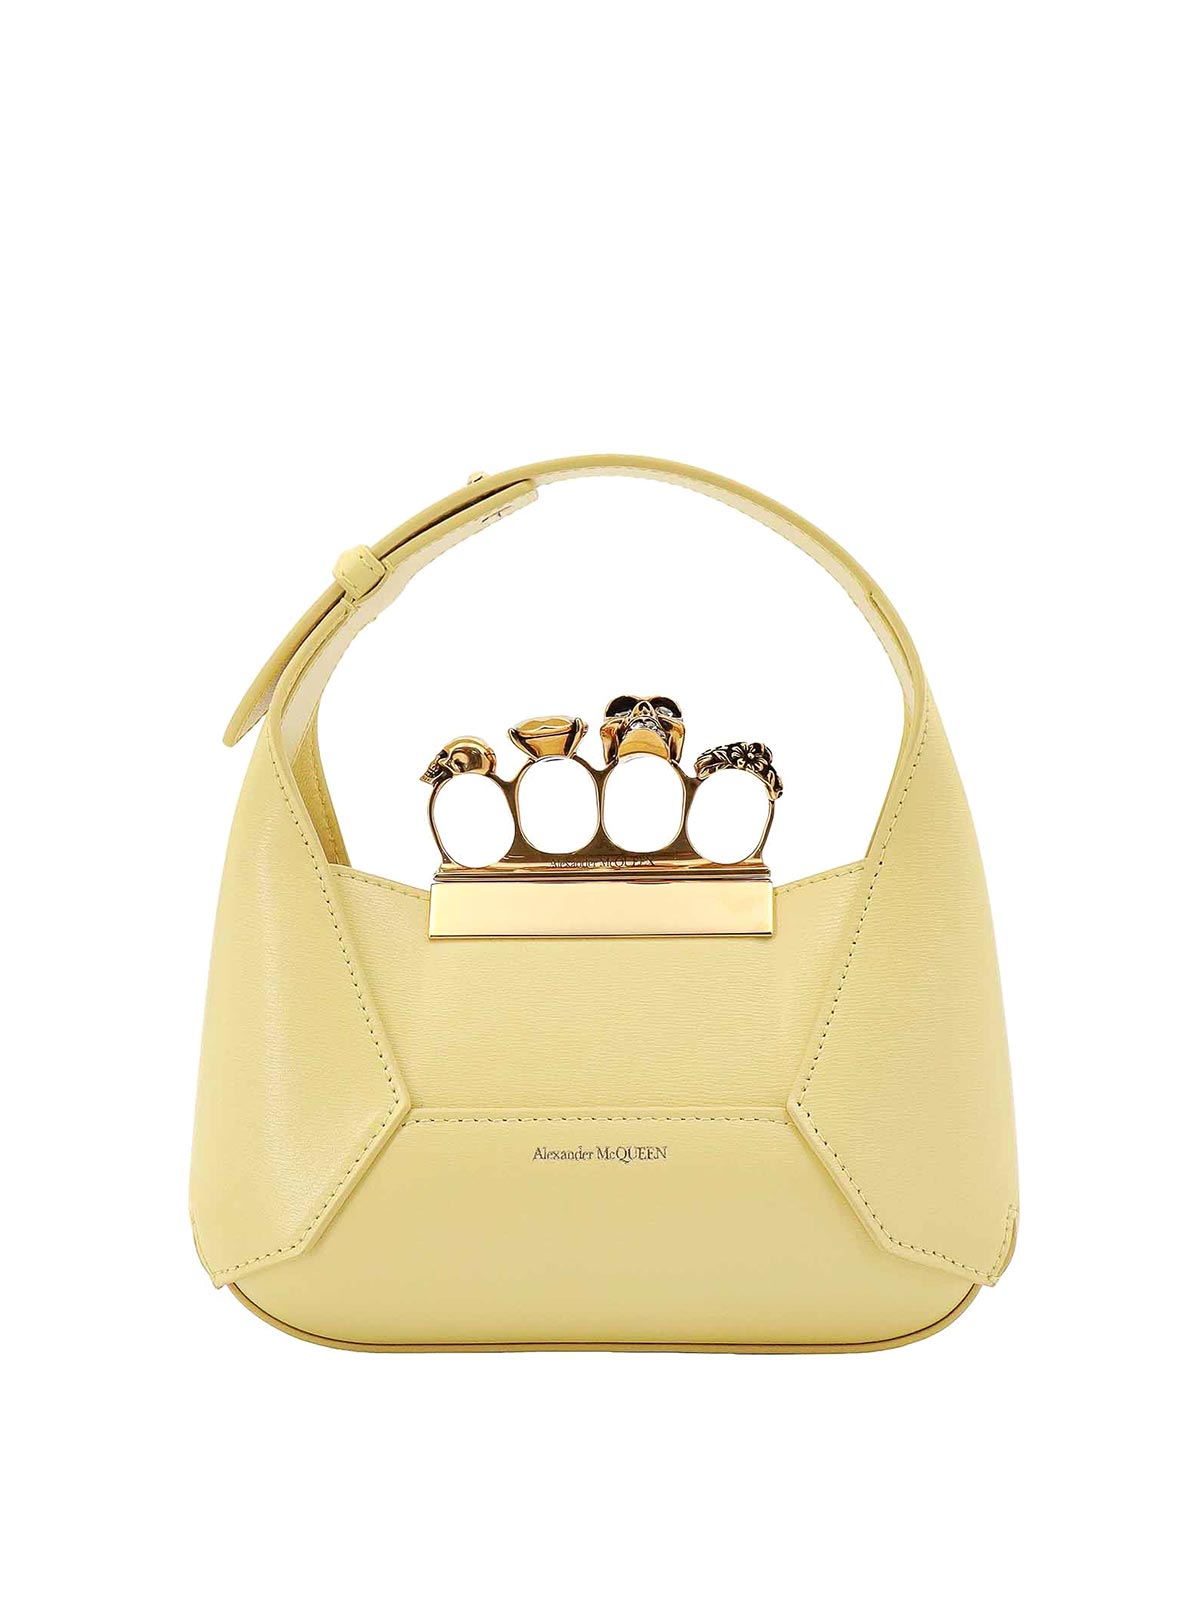 Alexander Mcqueen Leather Handbag With Metal Rings And Swarovski In Yellow